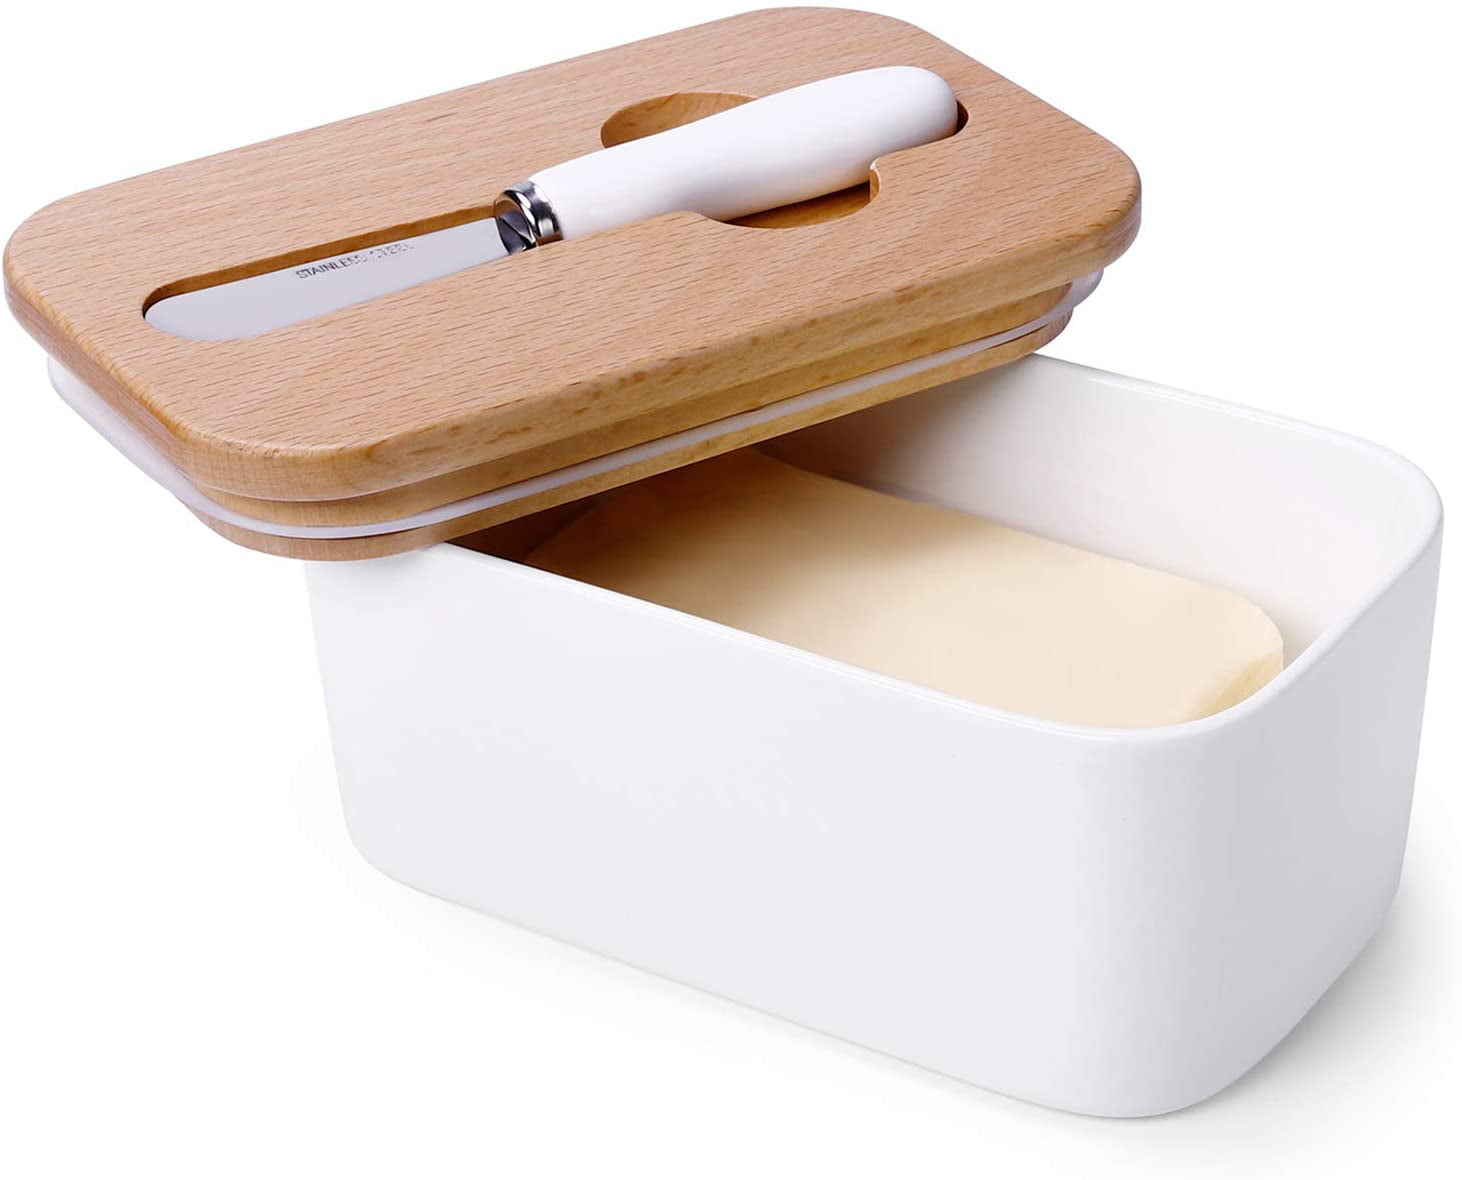 Cutting Board Details about   Sweese Porcelain Butter Dish Butter Keeper with Beech Wooden Lid 